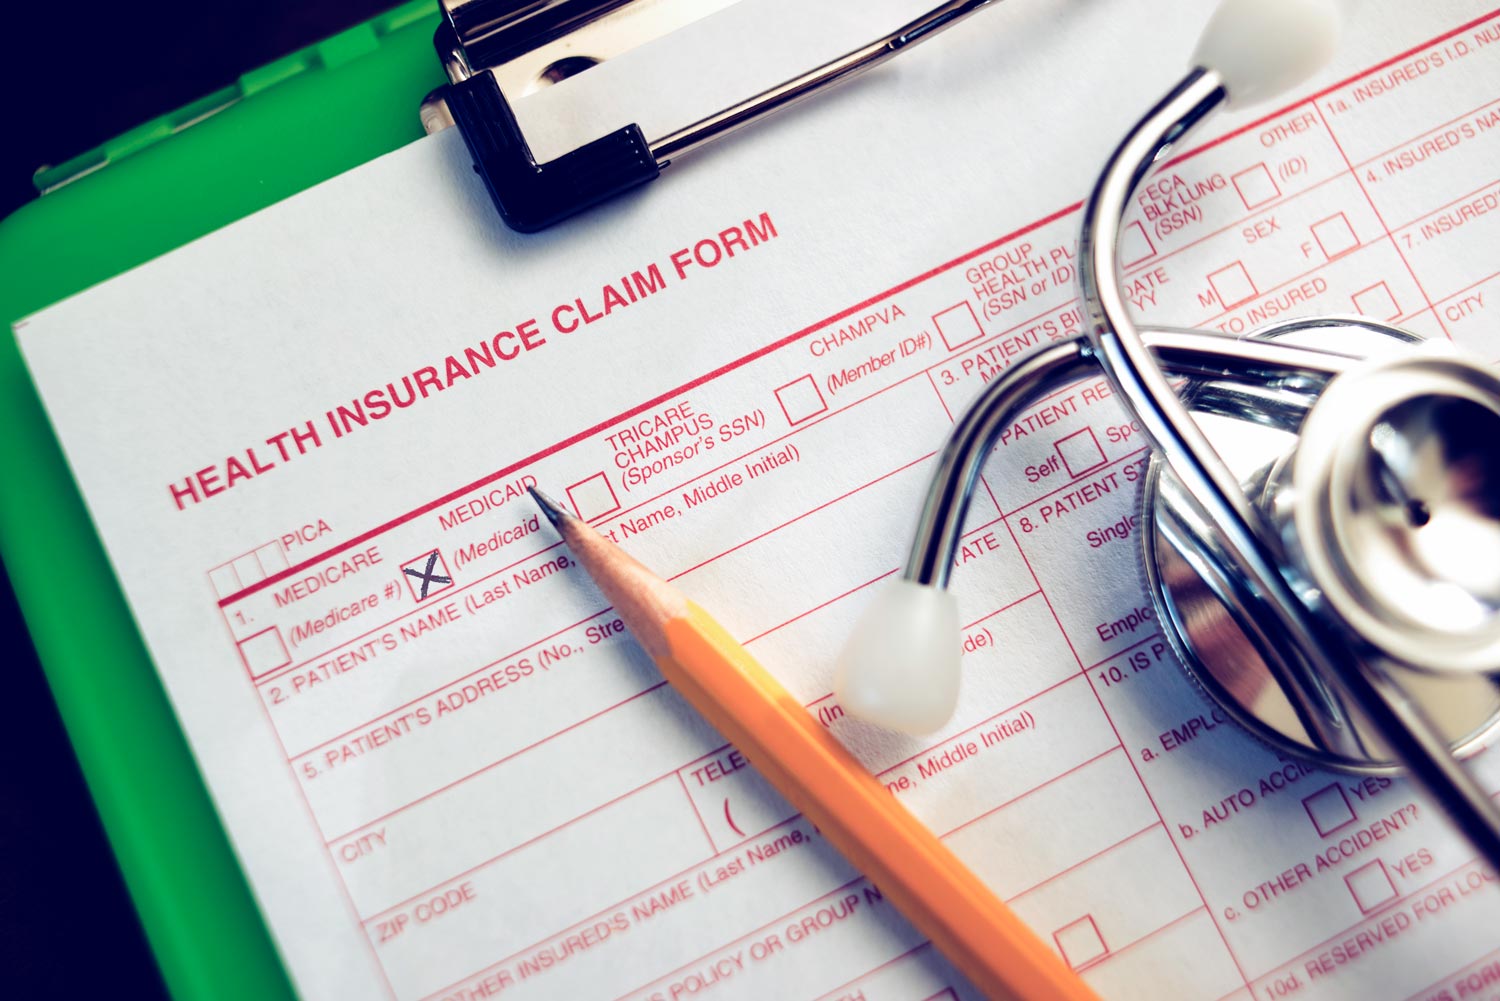 Health Insurance Claim Form with a pencil on it and stethoscope